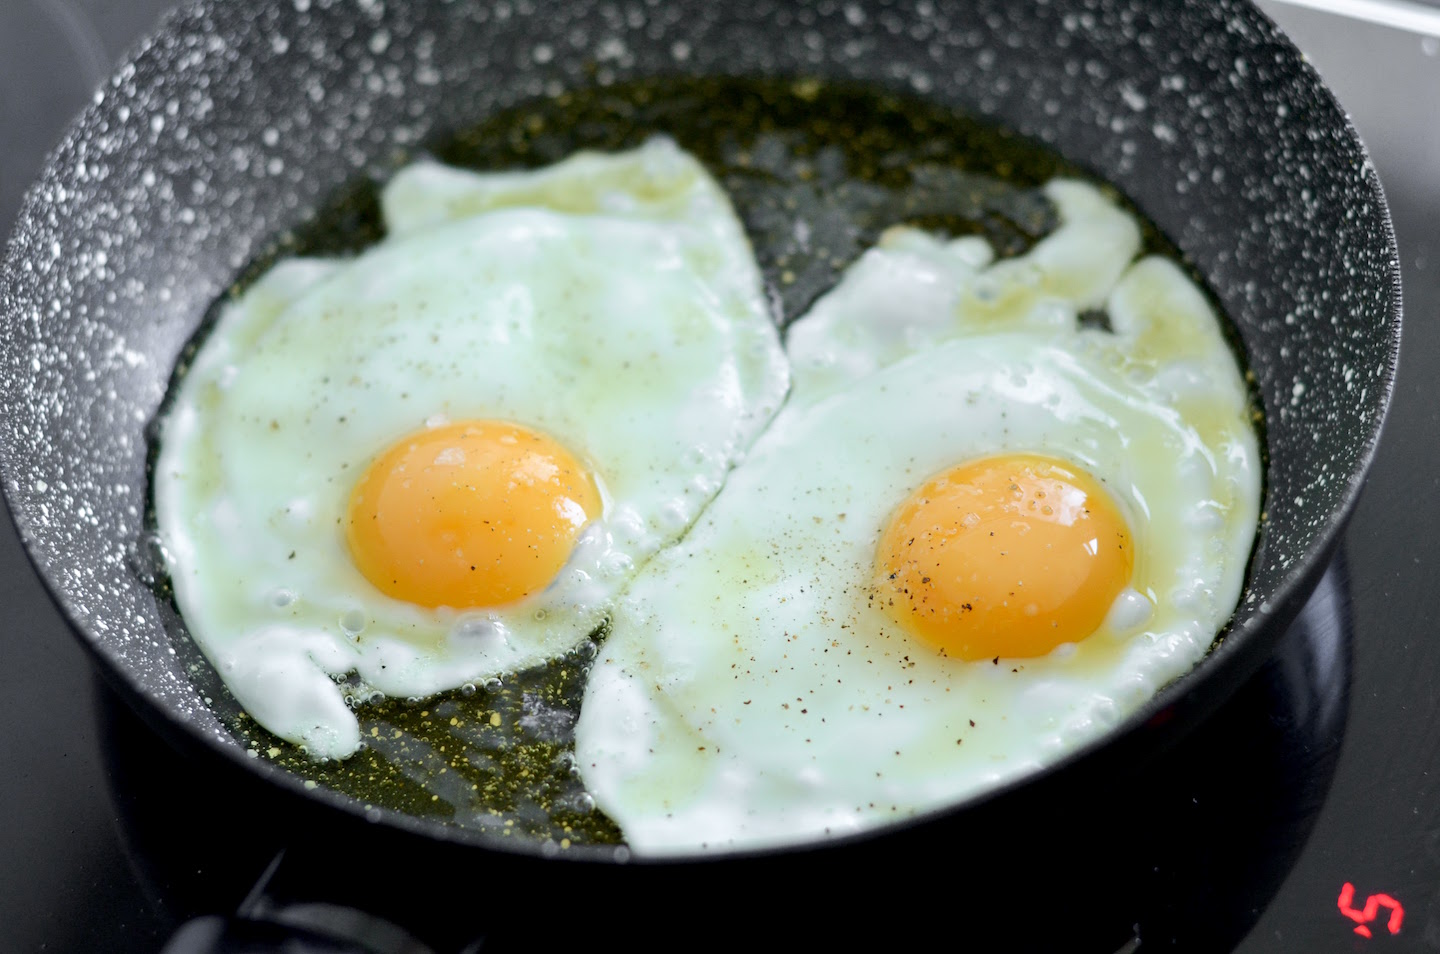 Sunny side up eggs